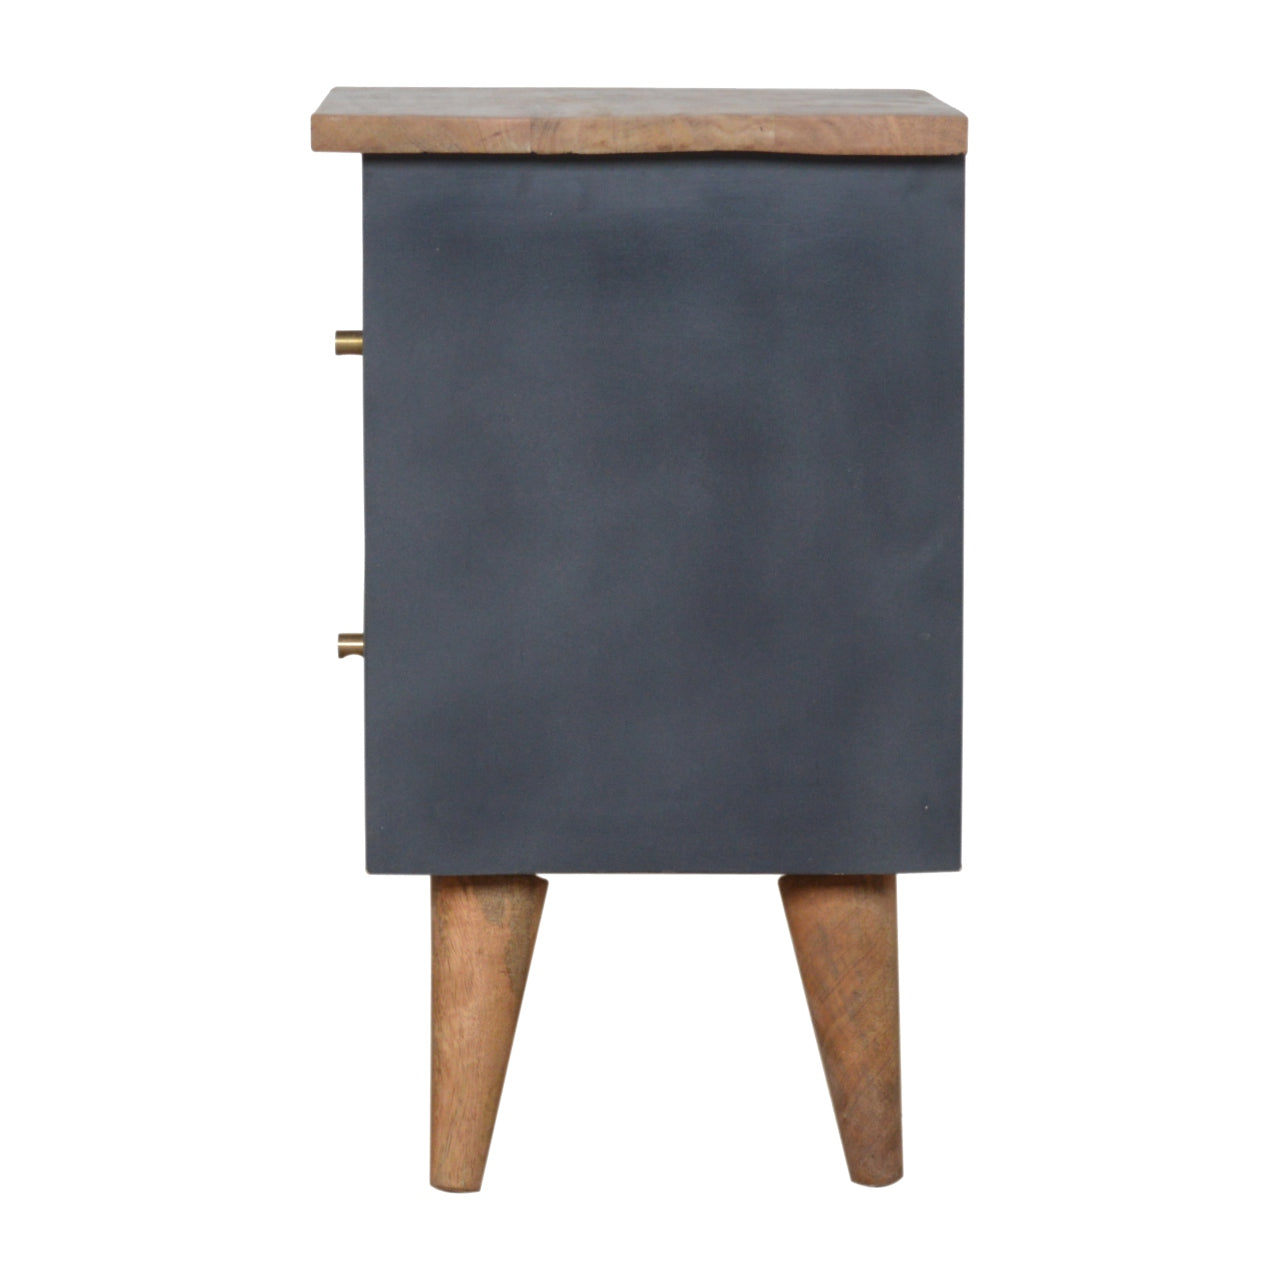 Charcoal Black Hand Painted Artisan Bedside